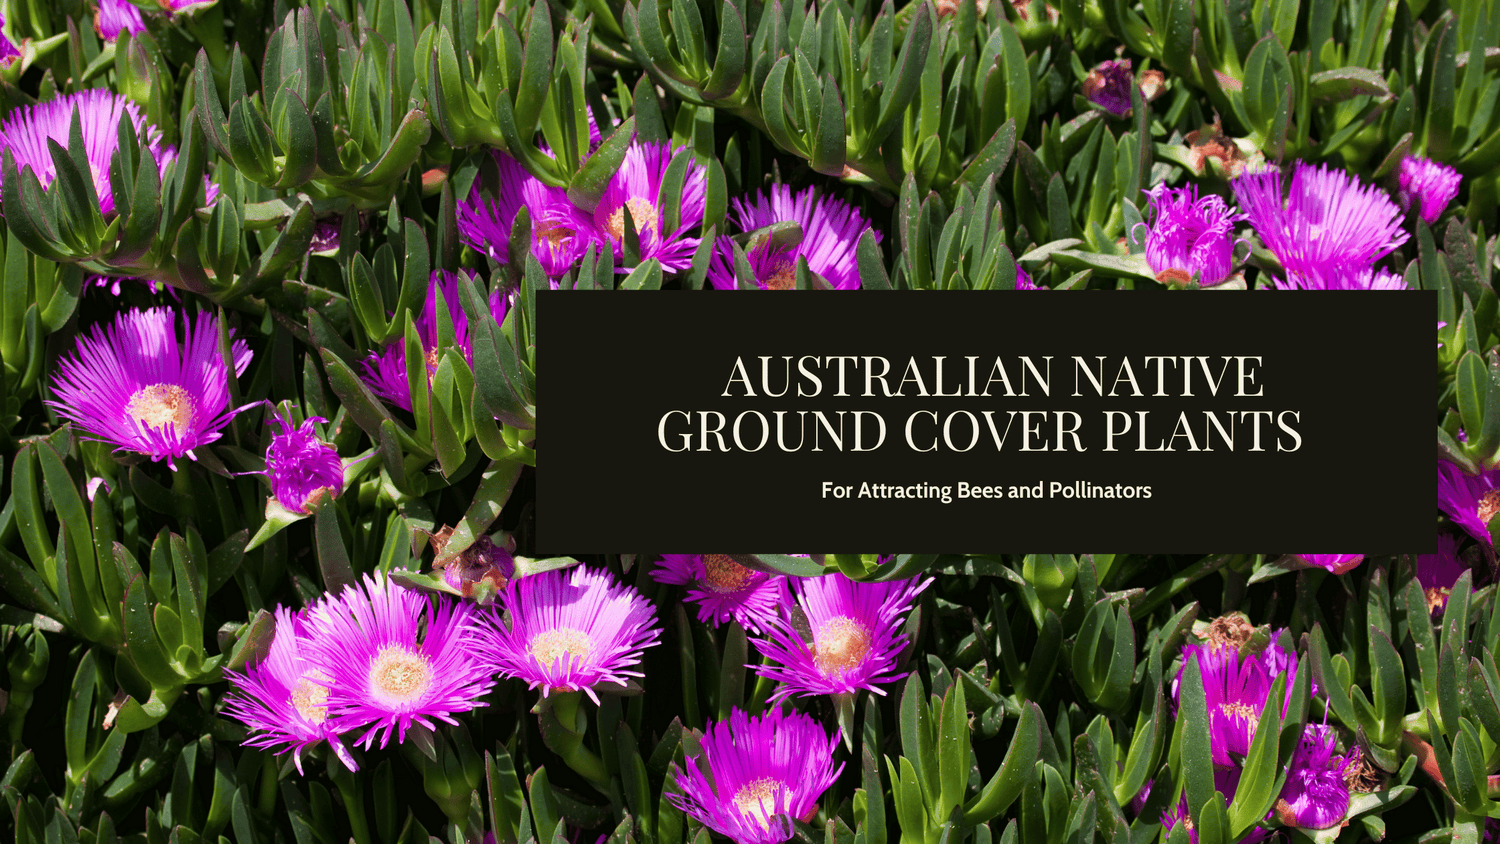 Our Top Picks For Australian Native Ground Cover Plants To Attract Bees